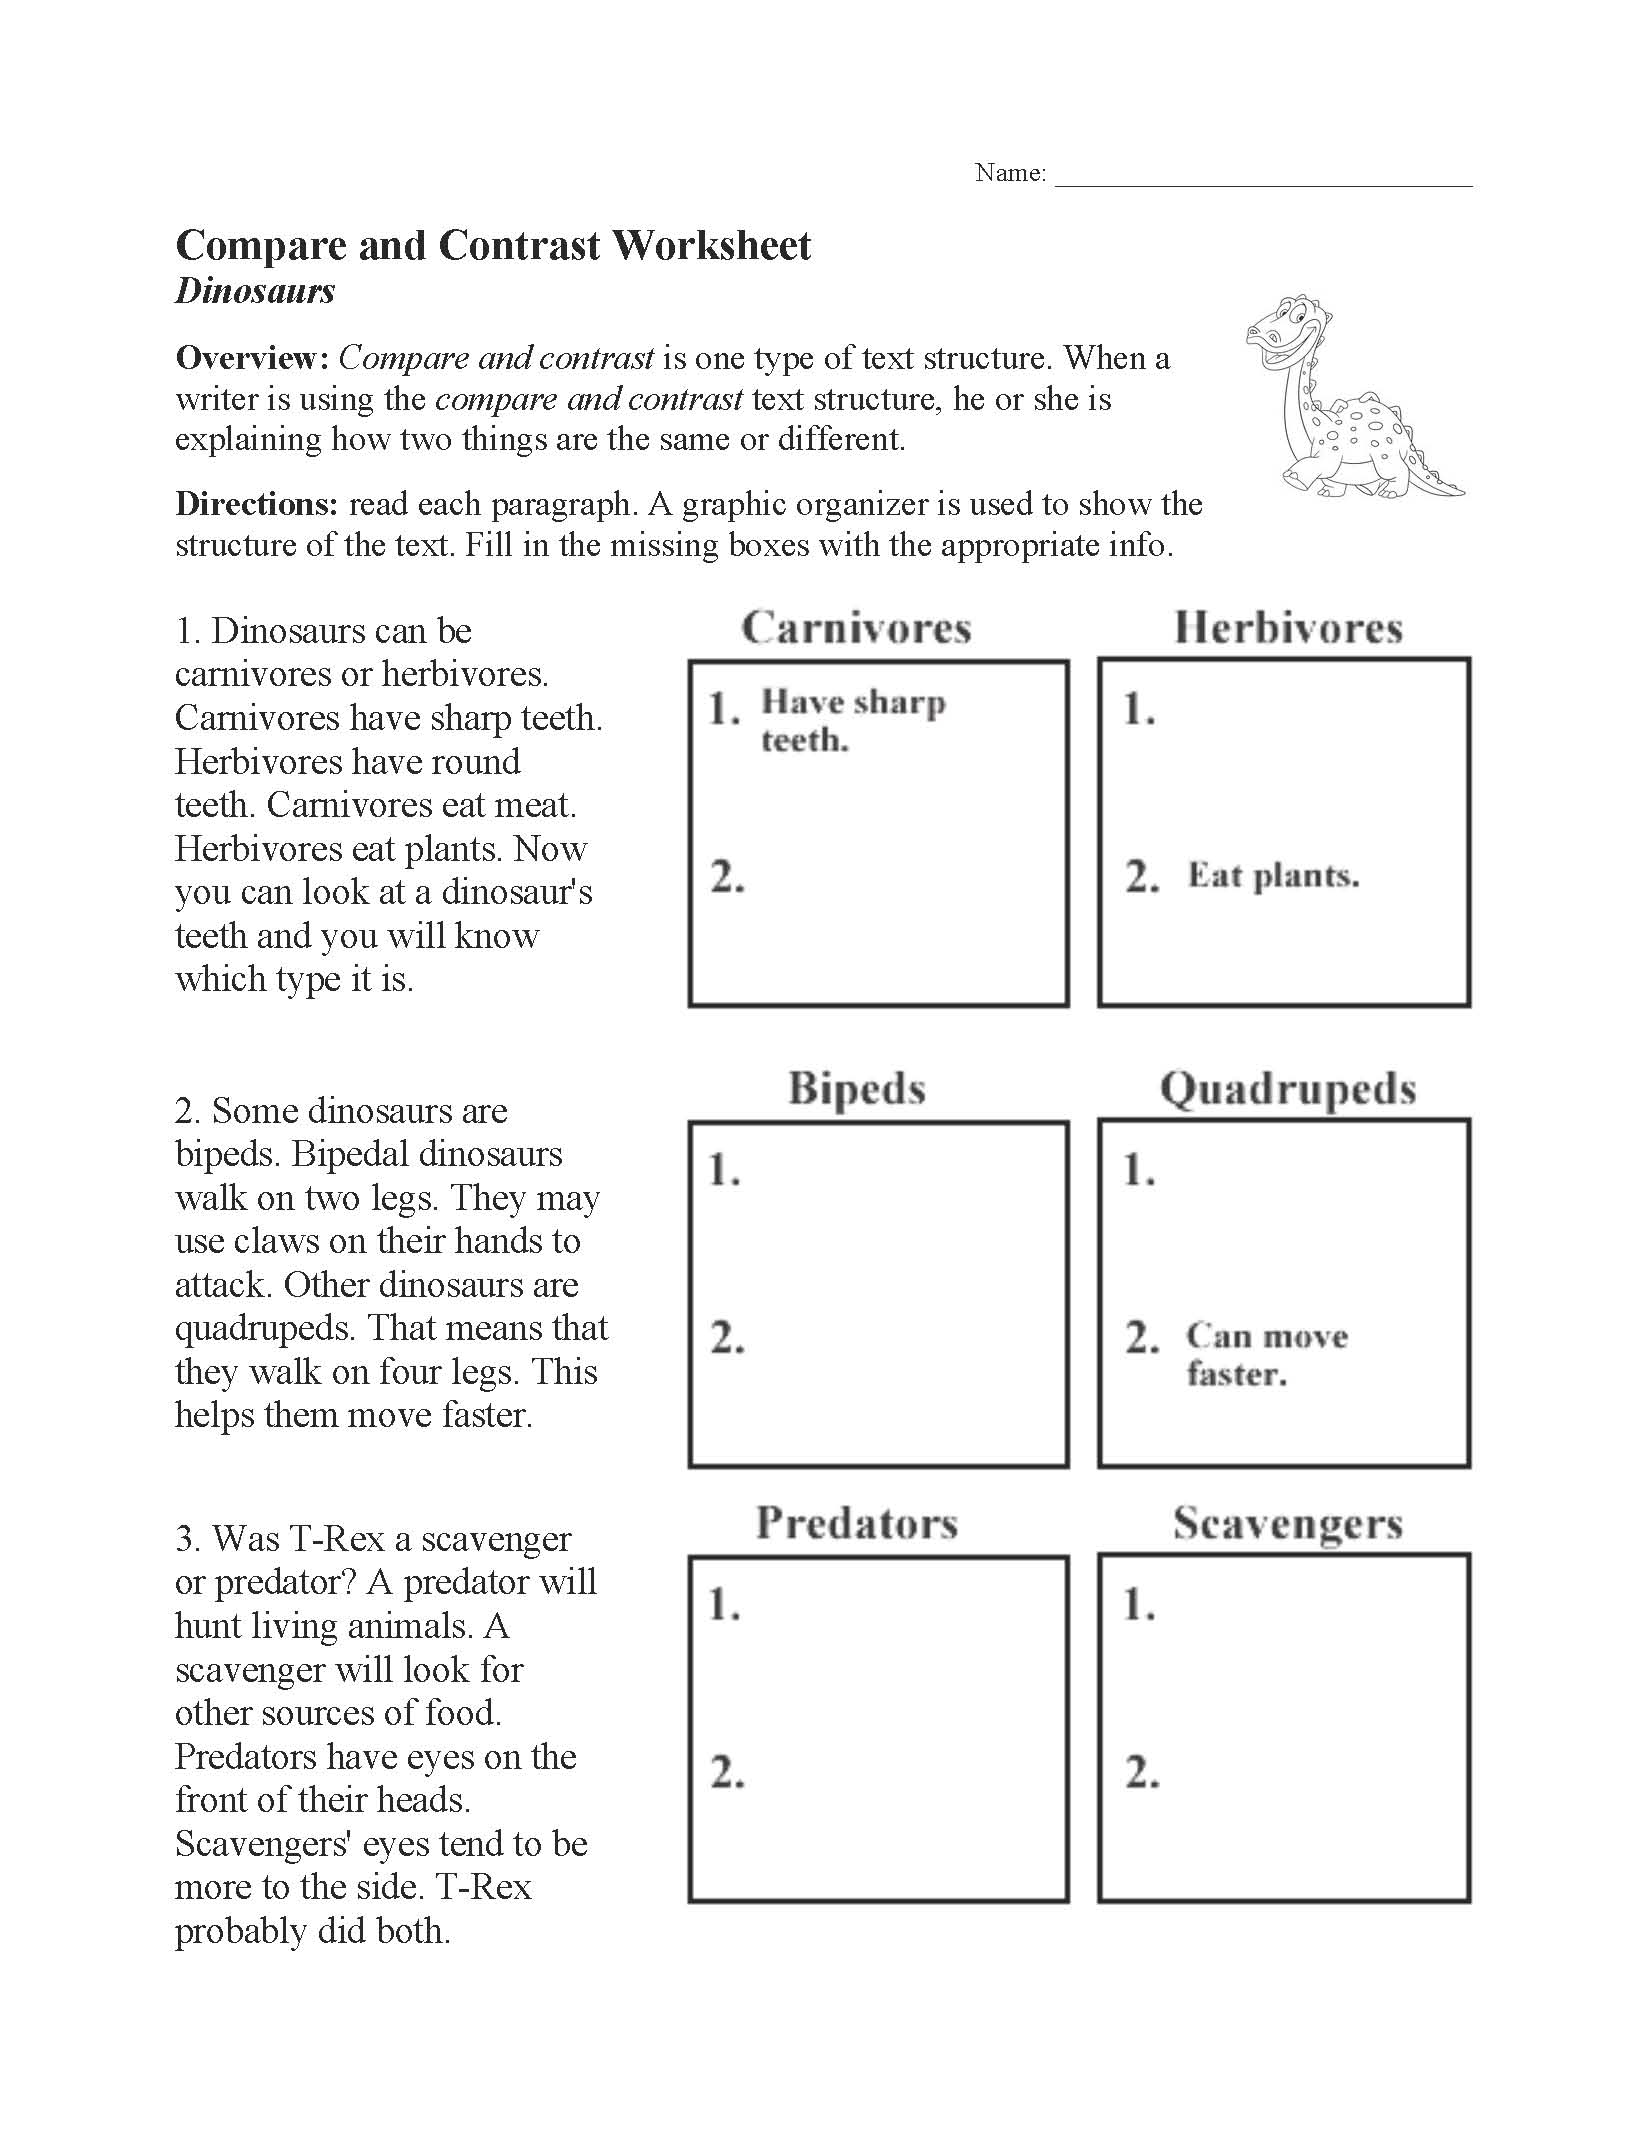 This is a preview image of our Compare and Contrast Worksheet. Click on it to enlarge this image and view the source file.